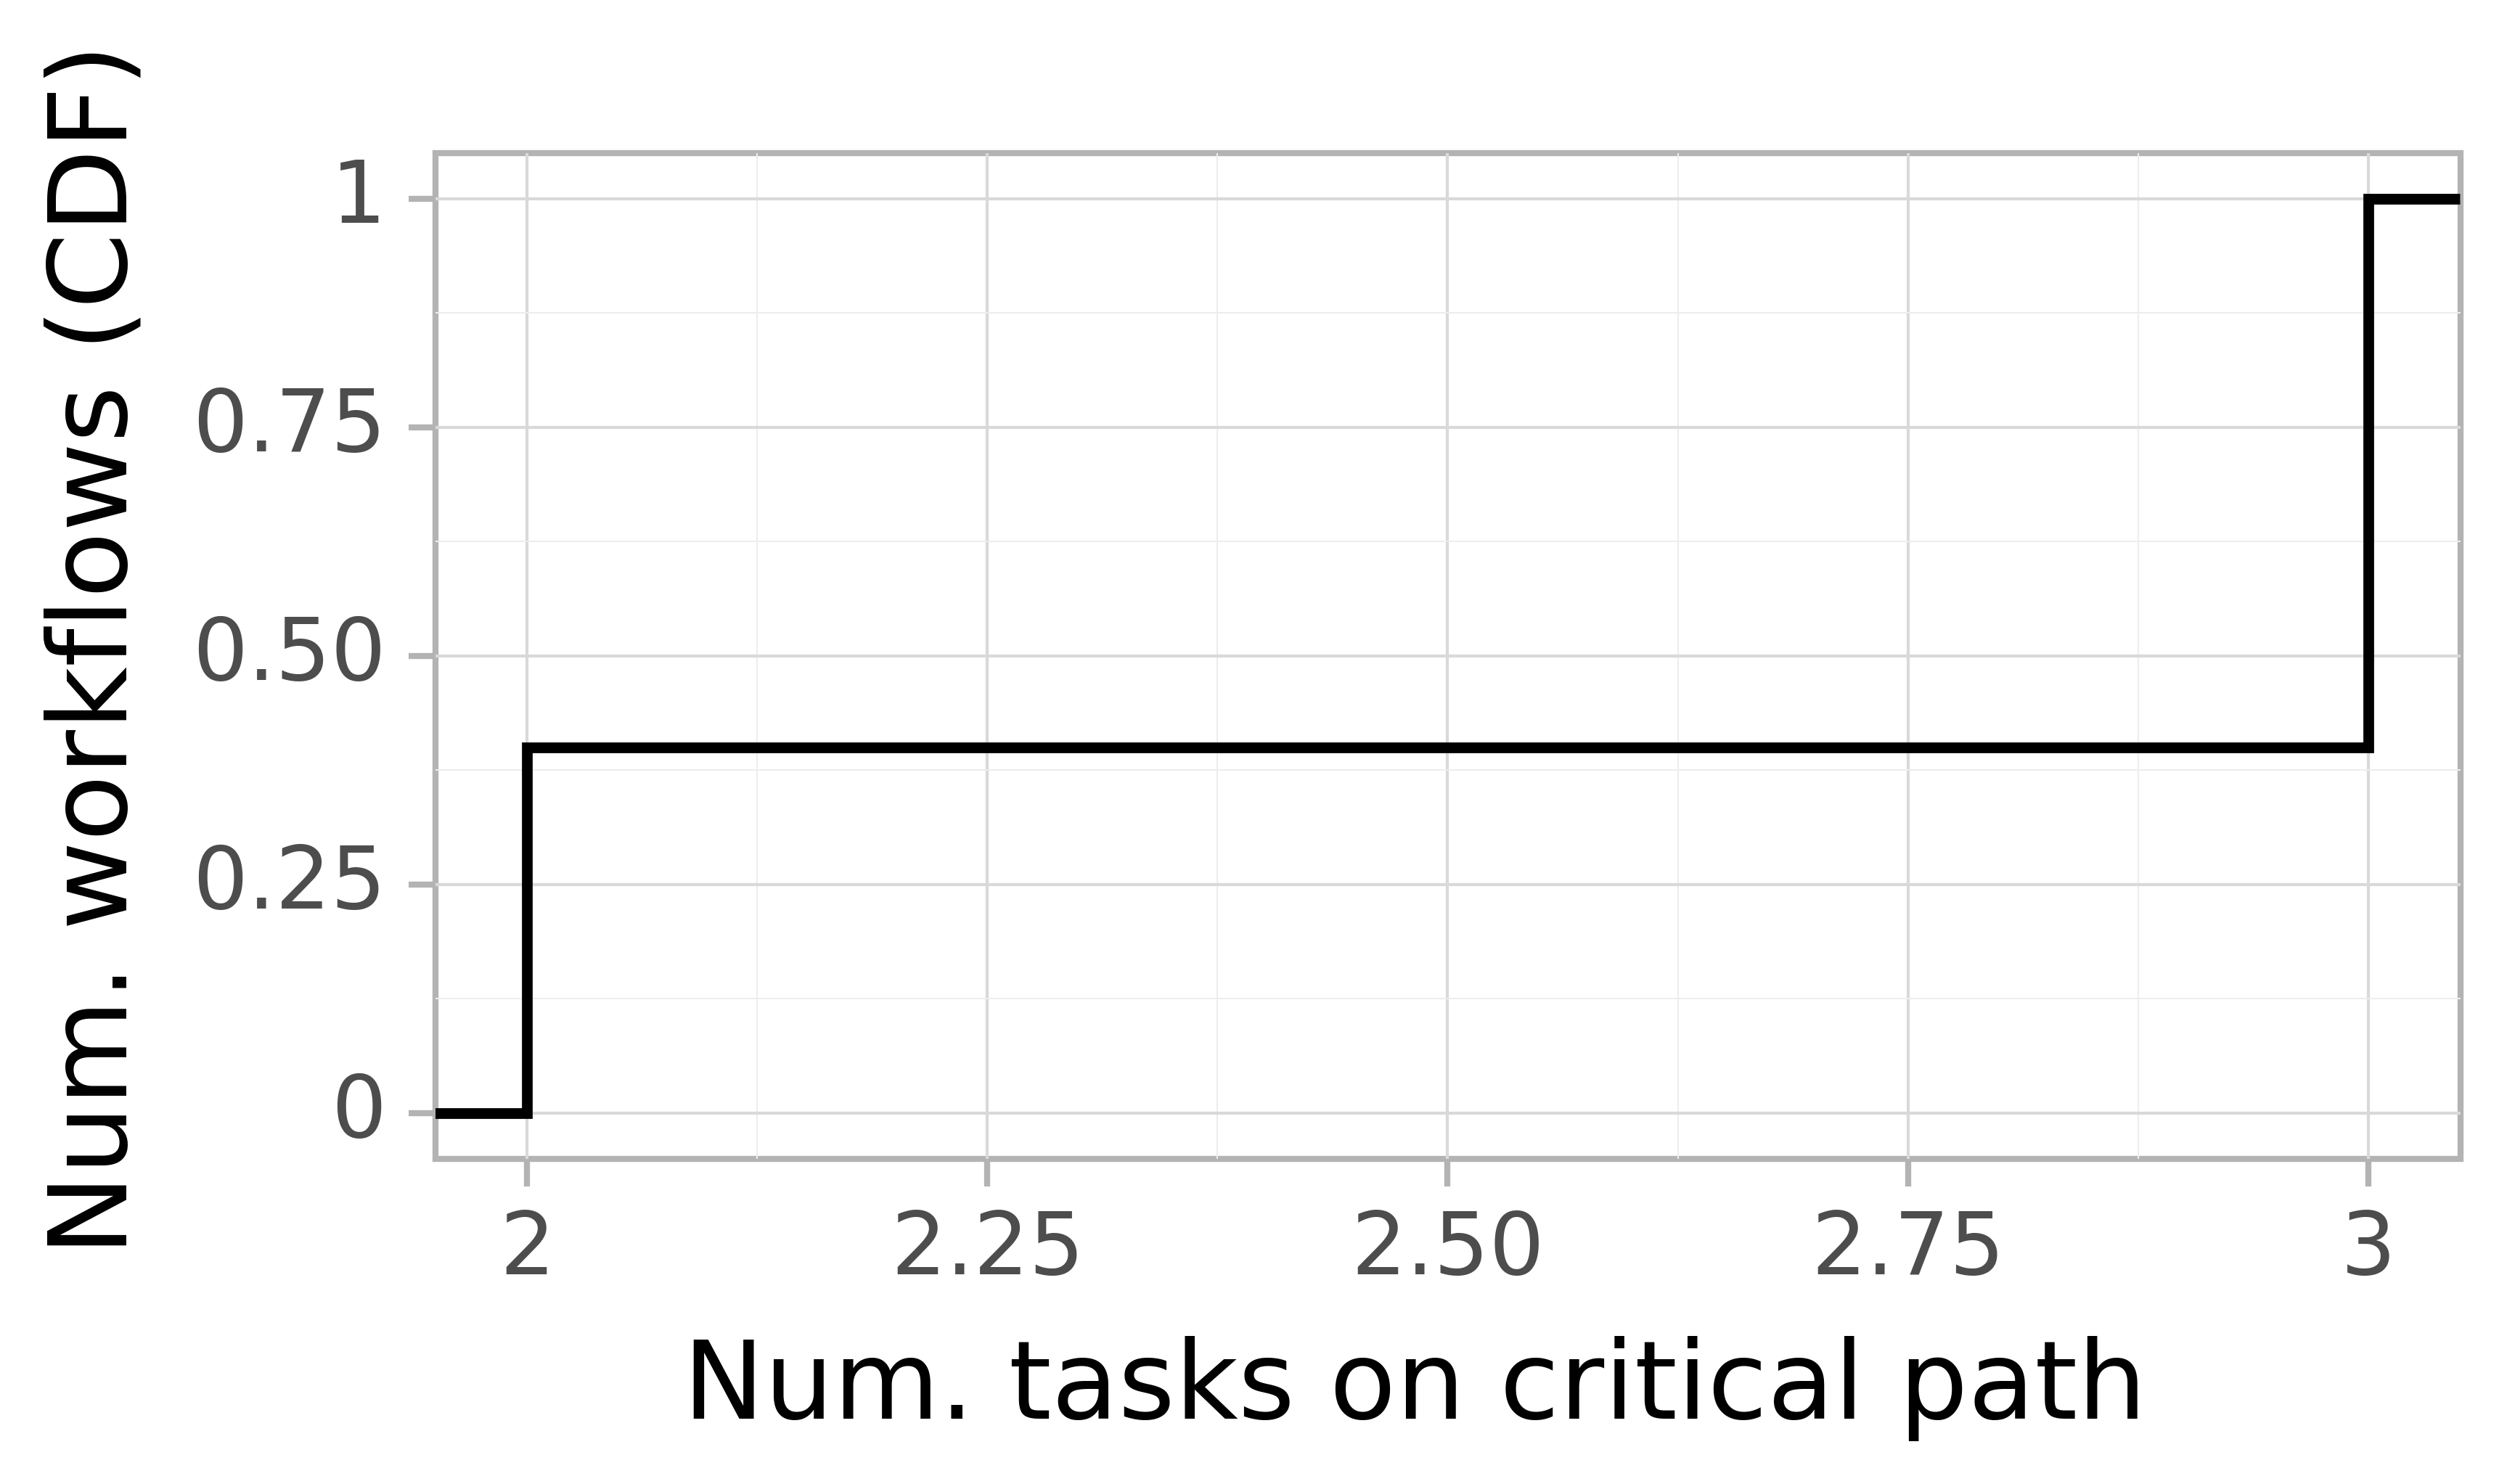 Job critical path task count graph for the Pegasus_P3 trace.